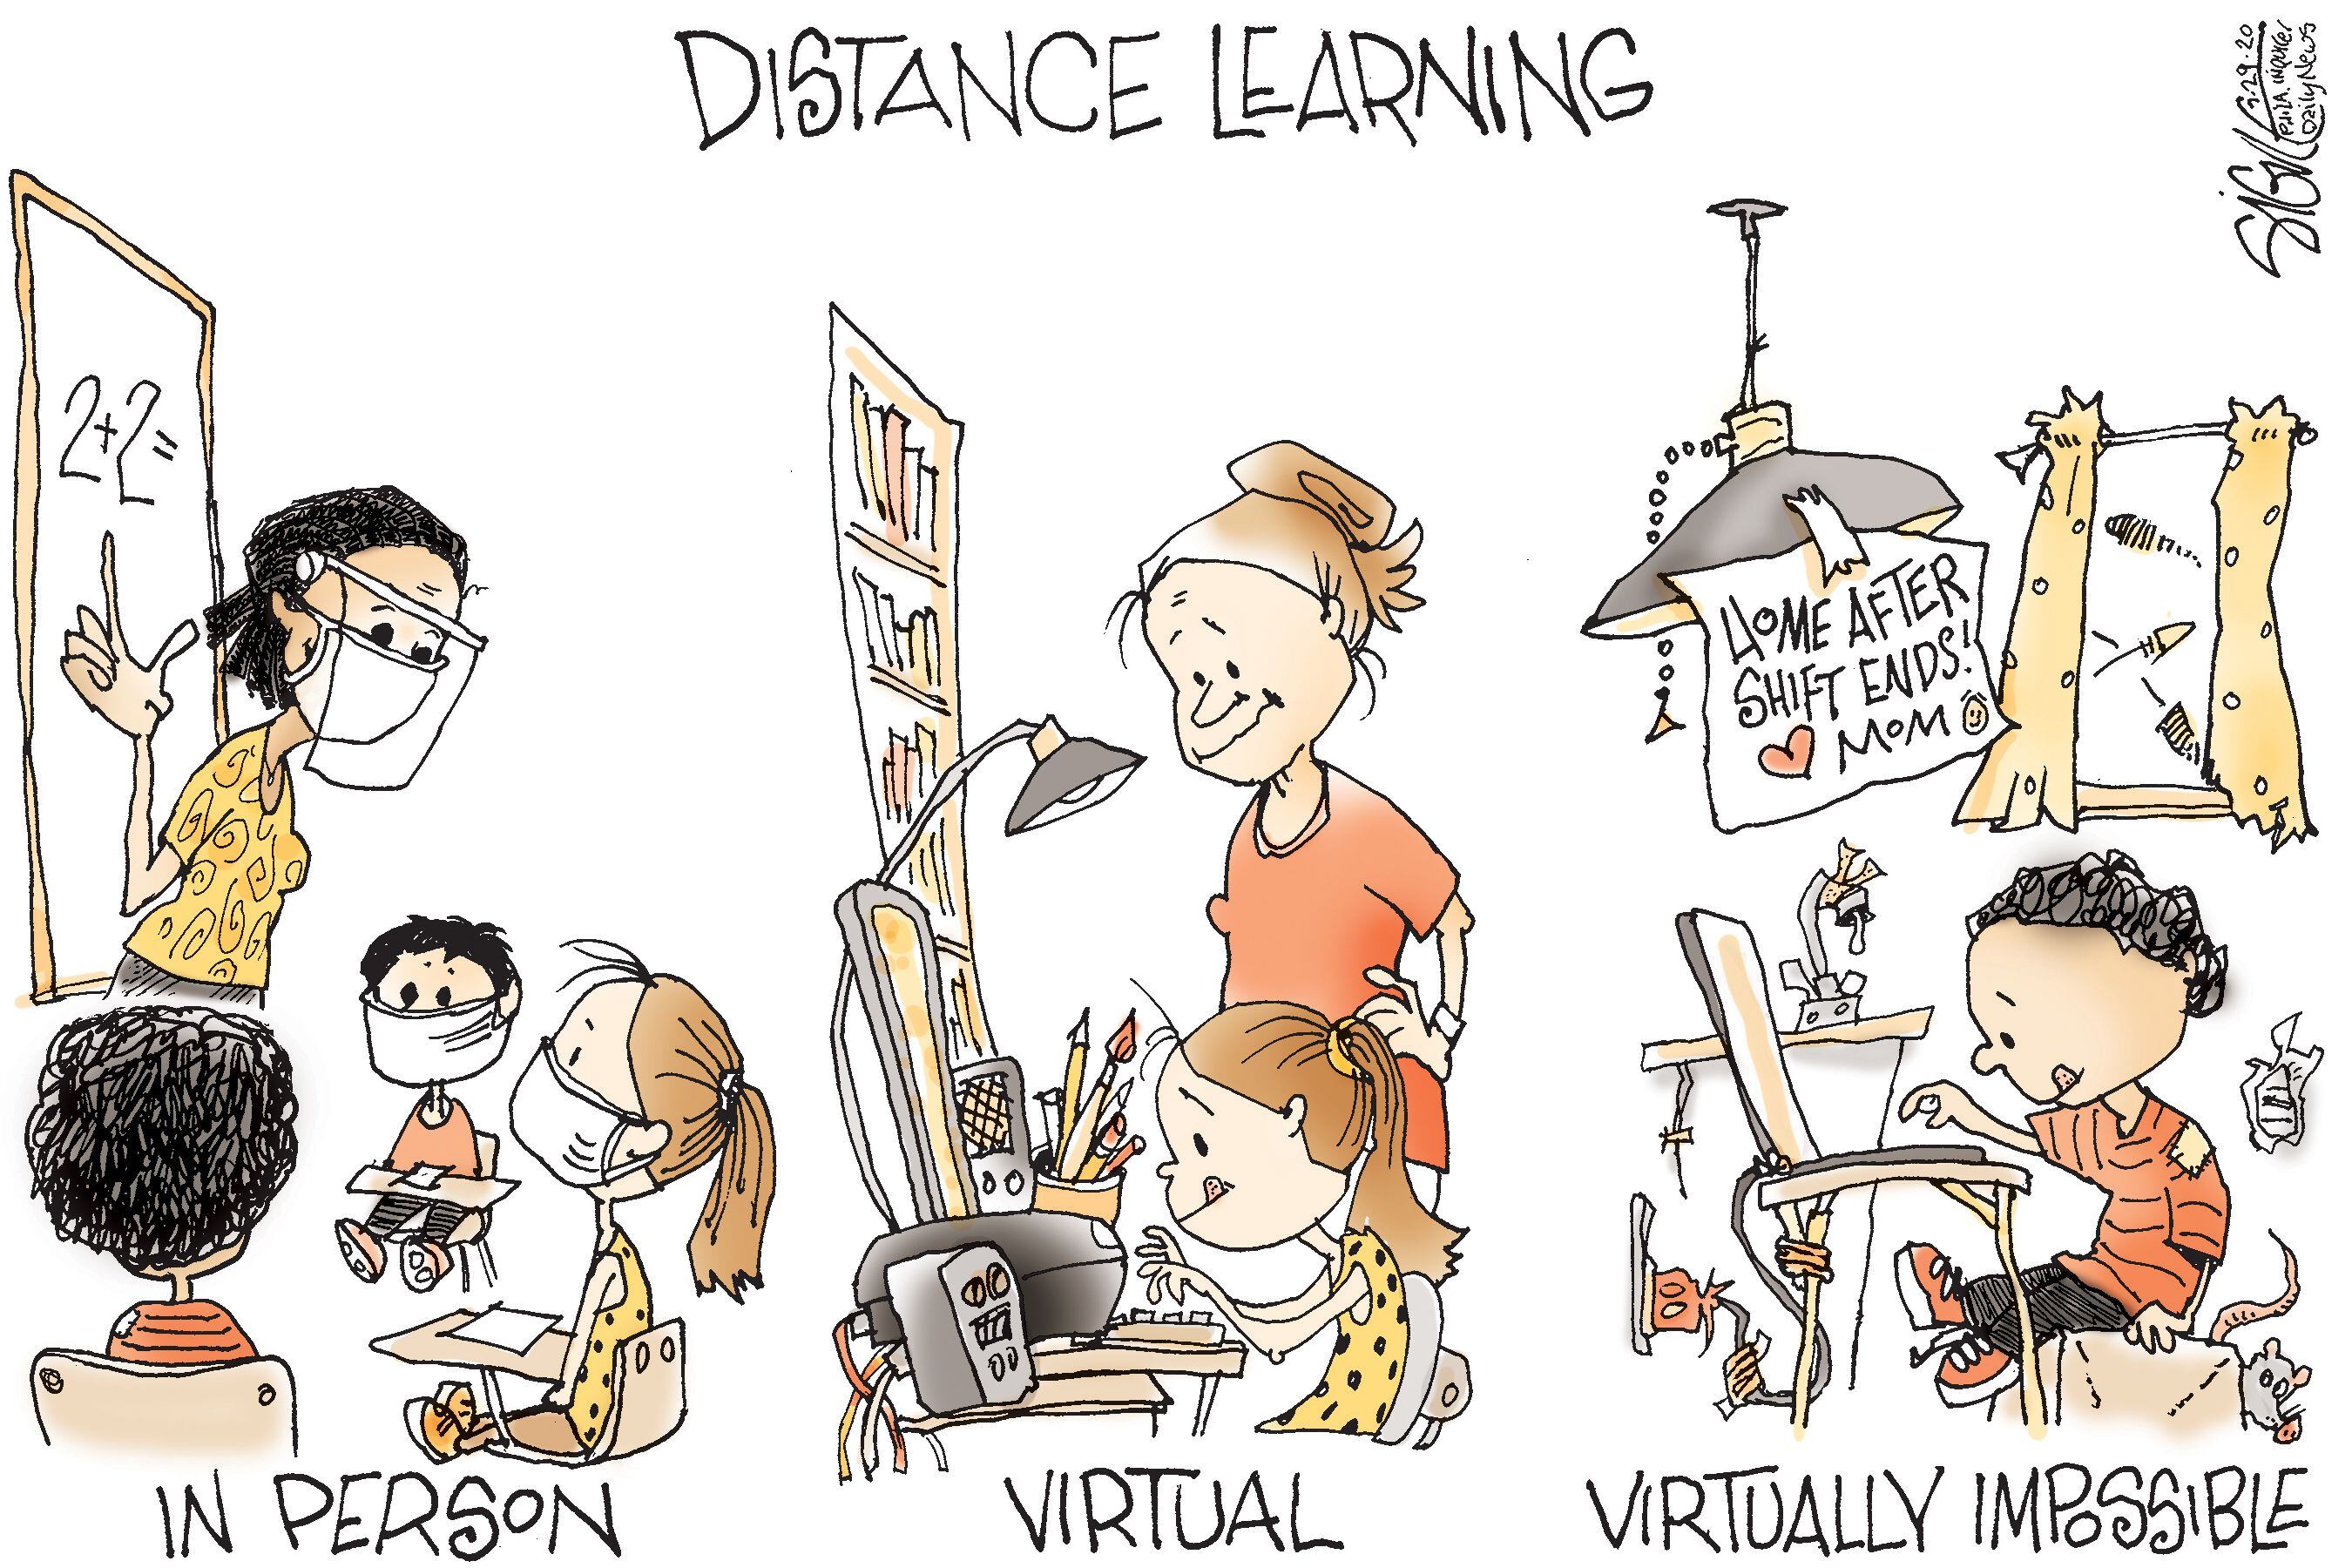 Political Cartoon: Virtually learning how to reopen schools